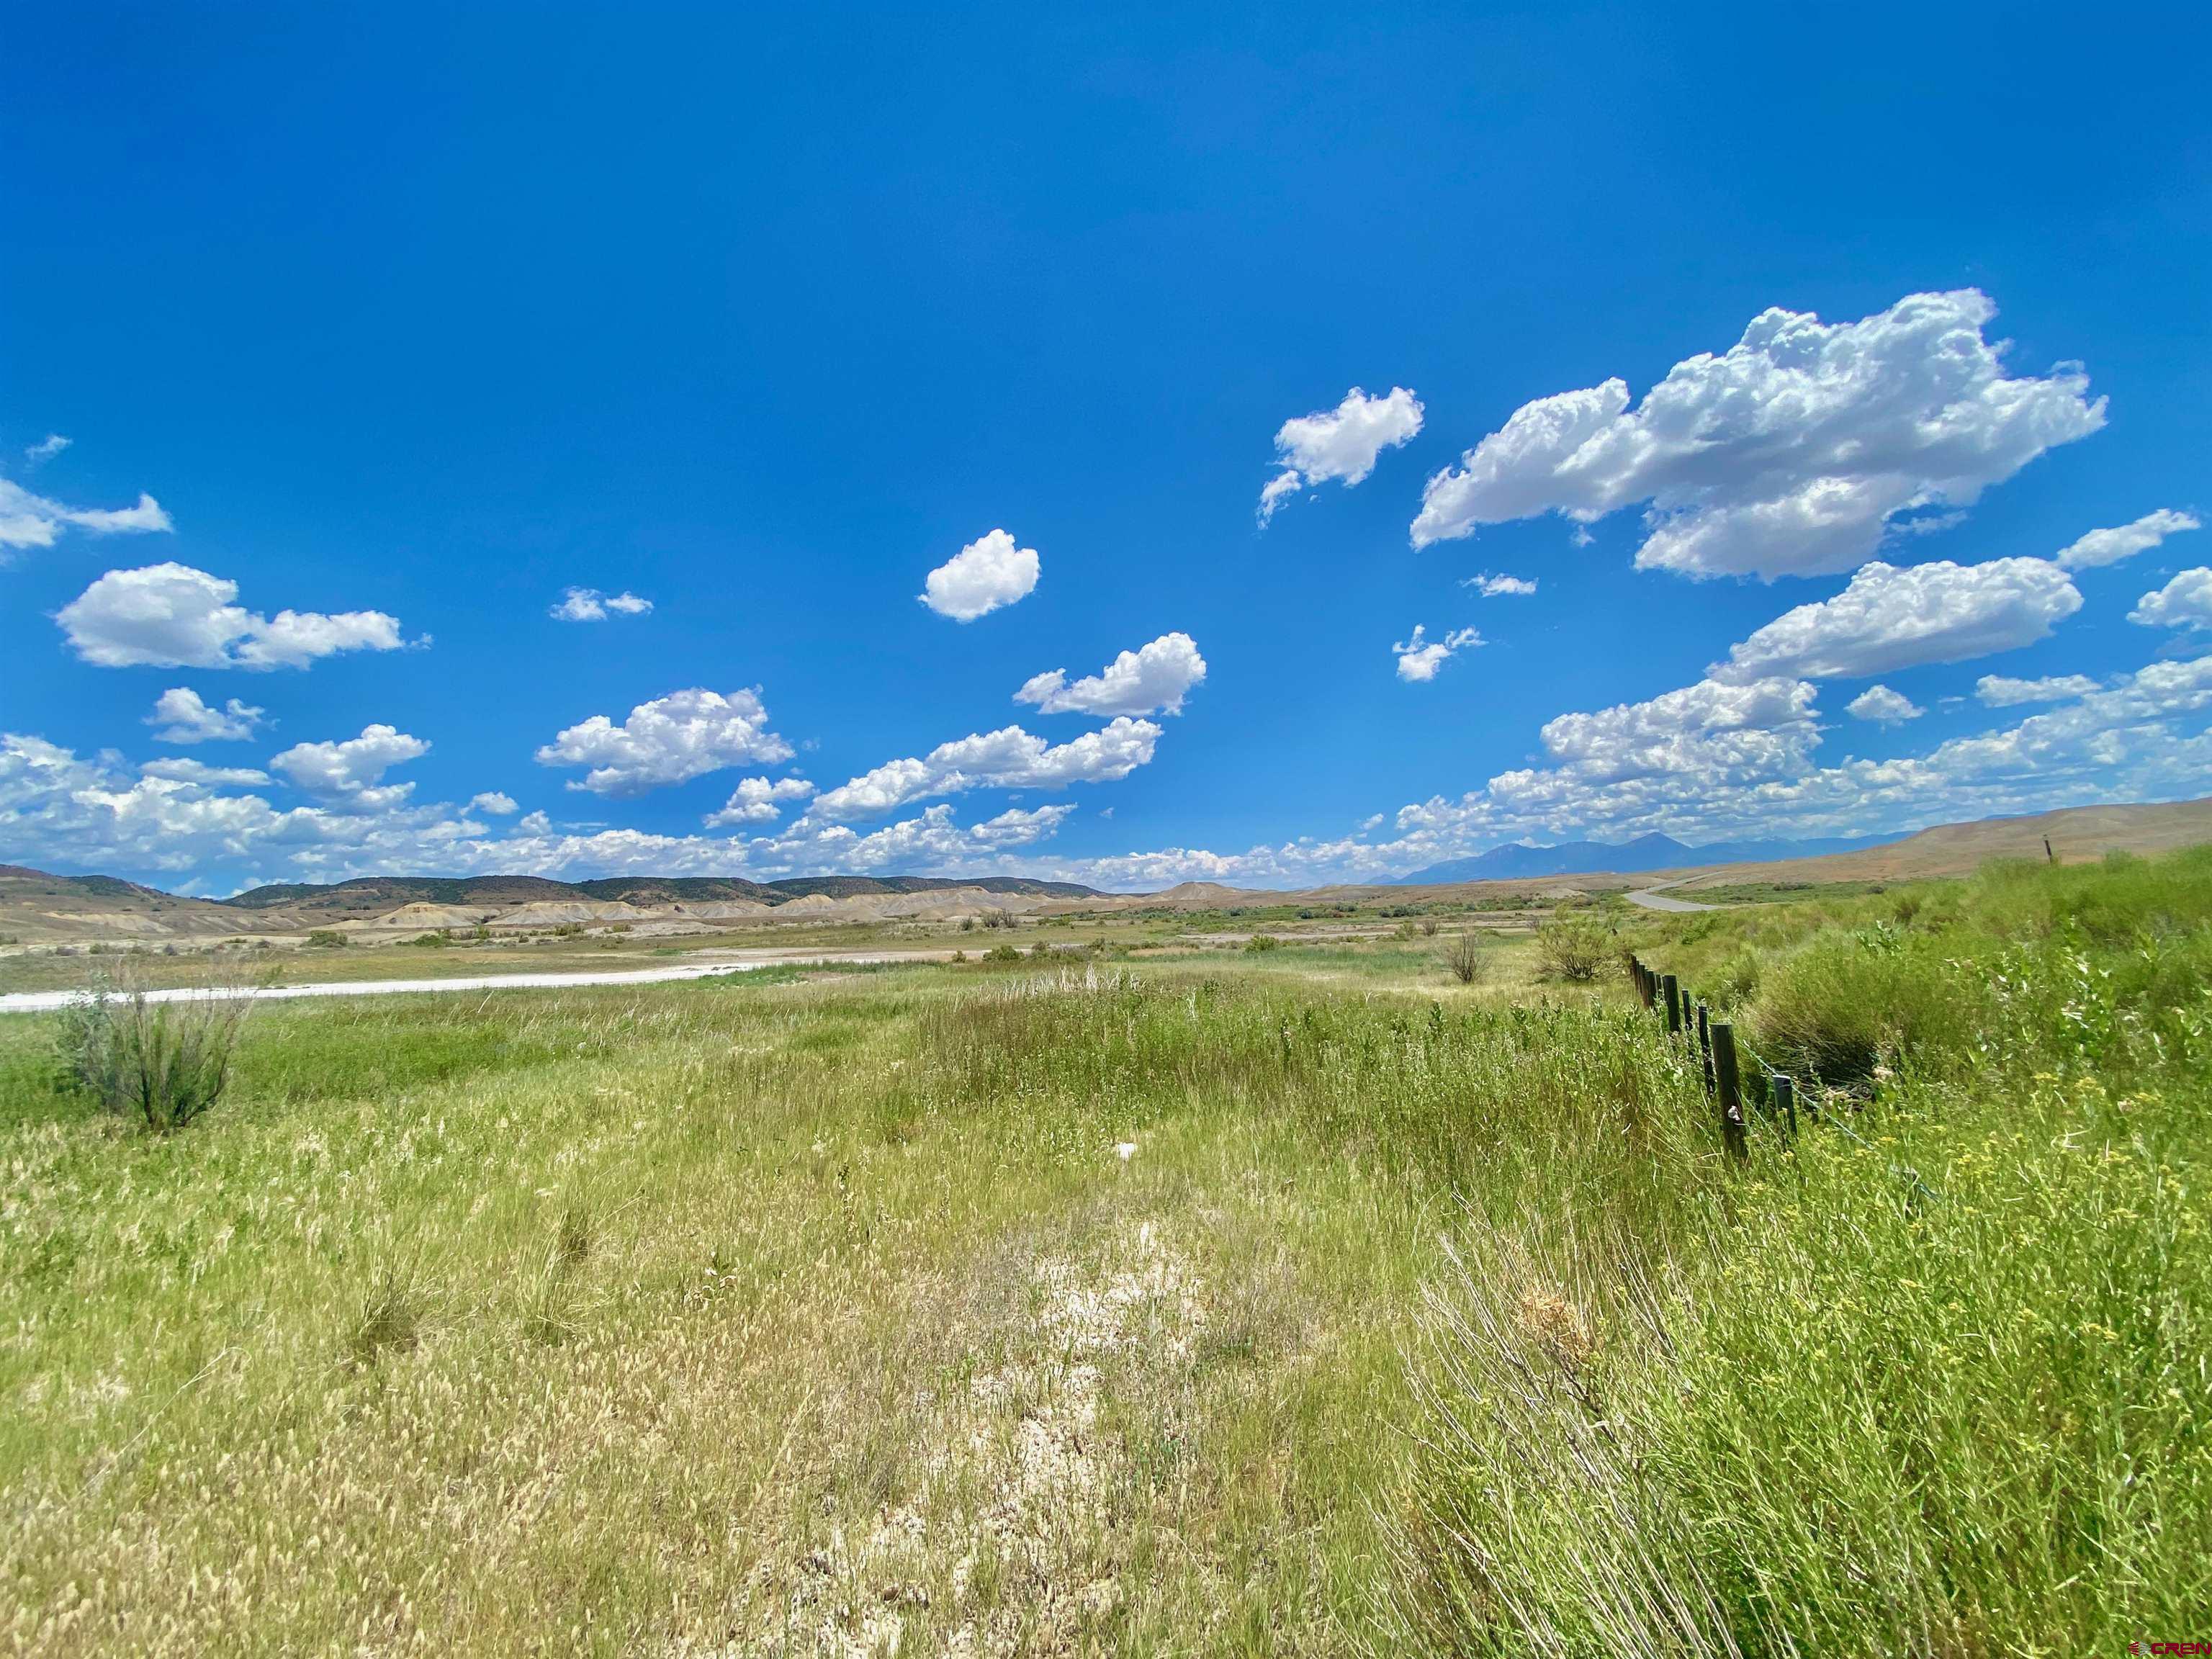 Wide open spaces!  This large parcel offers huge views and privacy.  Located between Delta and Hotchkiss, this property is conveniently located off the highway.  There is a conservation easement on the property and one home is allowed.